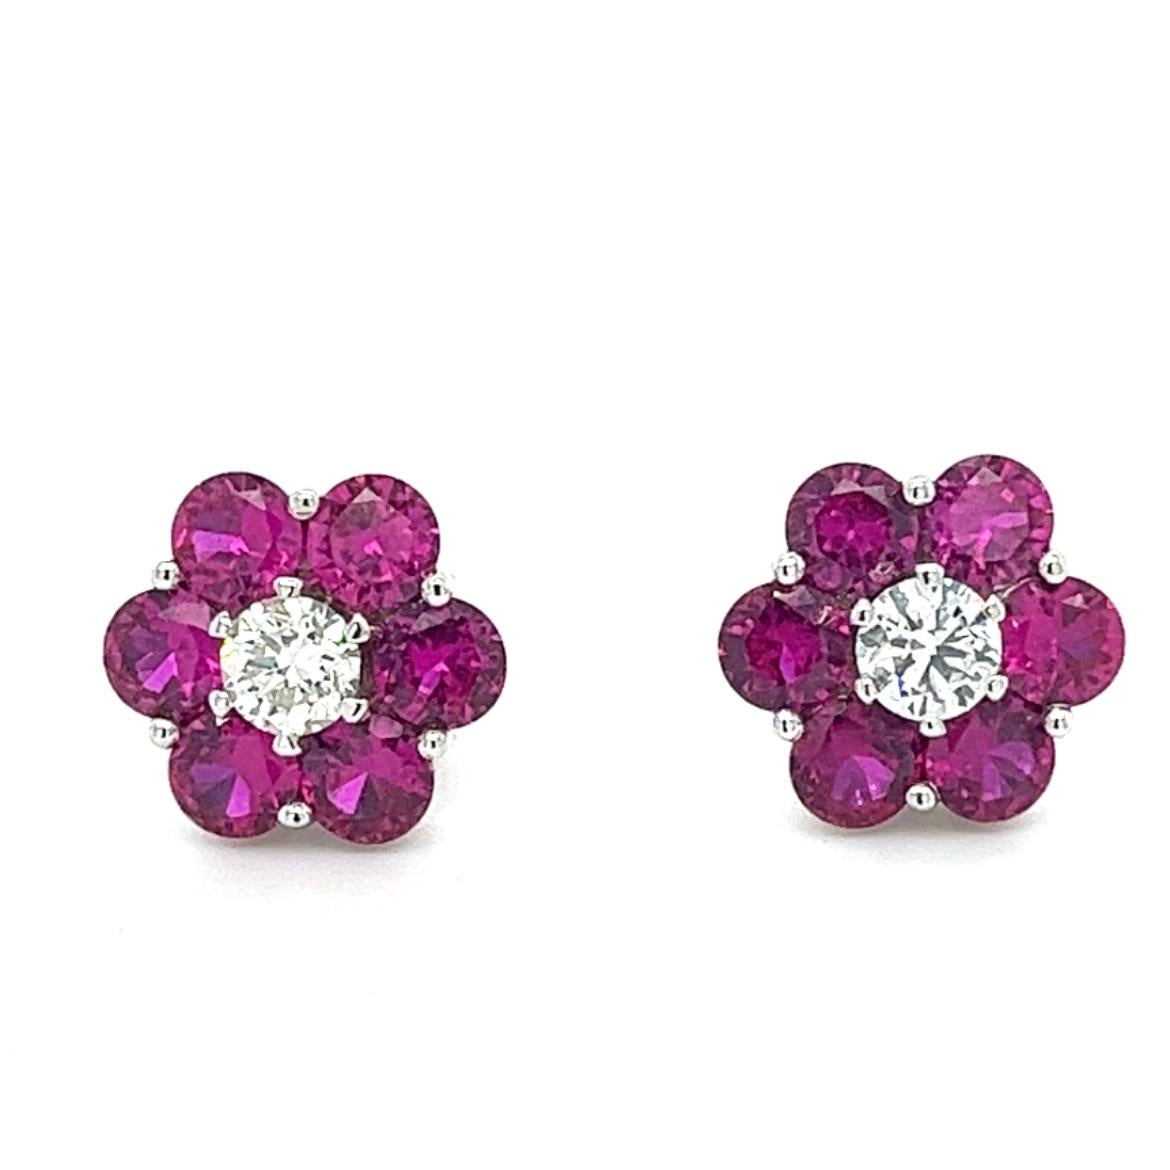 18K White Gold Red Sapphire Star Earrings 

2 Diamonds - 0.600 CT
12 Red Sapphires - 3.320 CT
18K White Gold - 6.26 GM

These stunning 18K white gold earrings feature a captivating star design, adorned with enchanting red sapphires that exude a